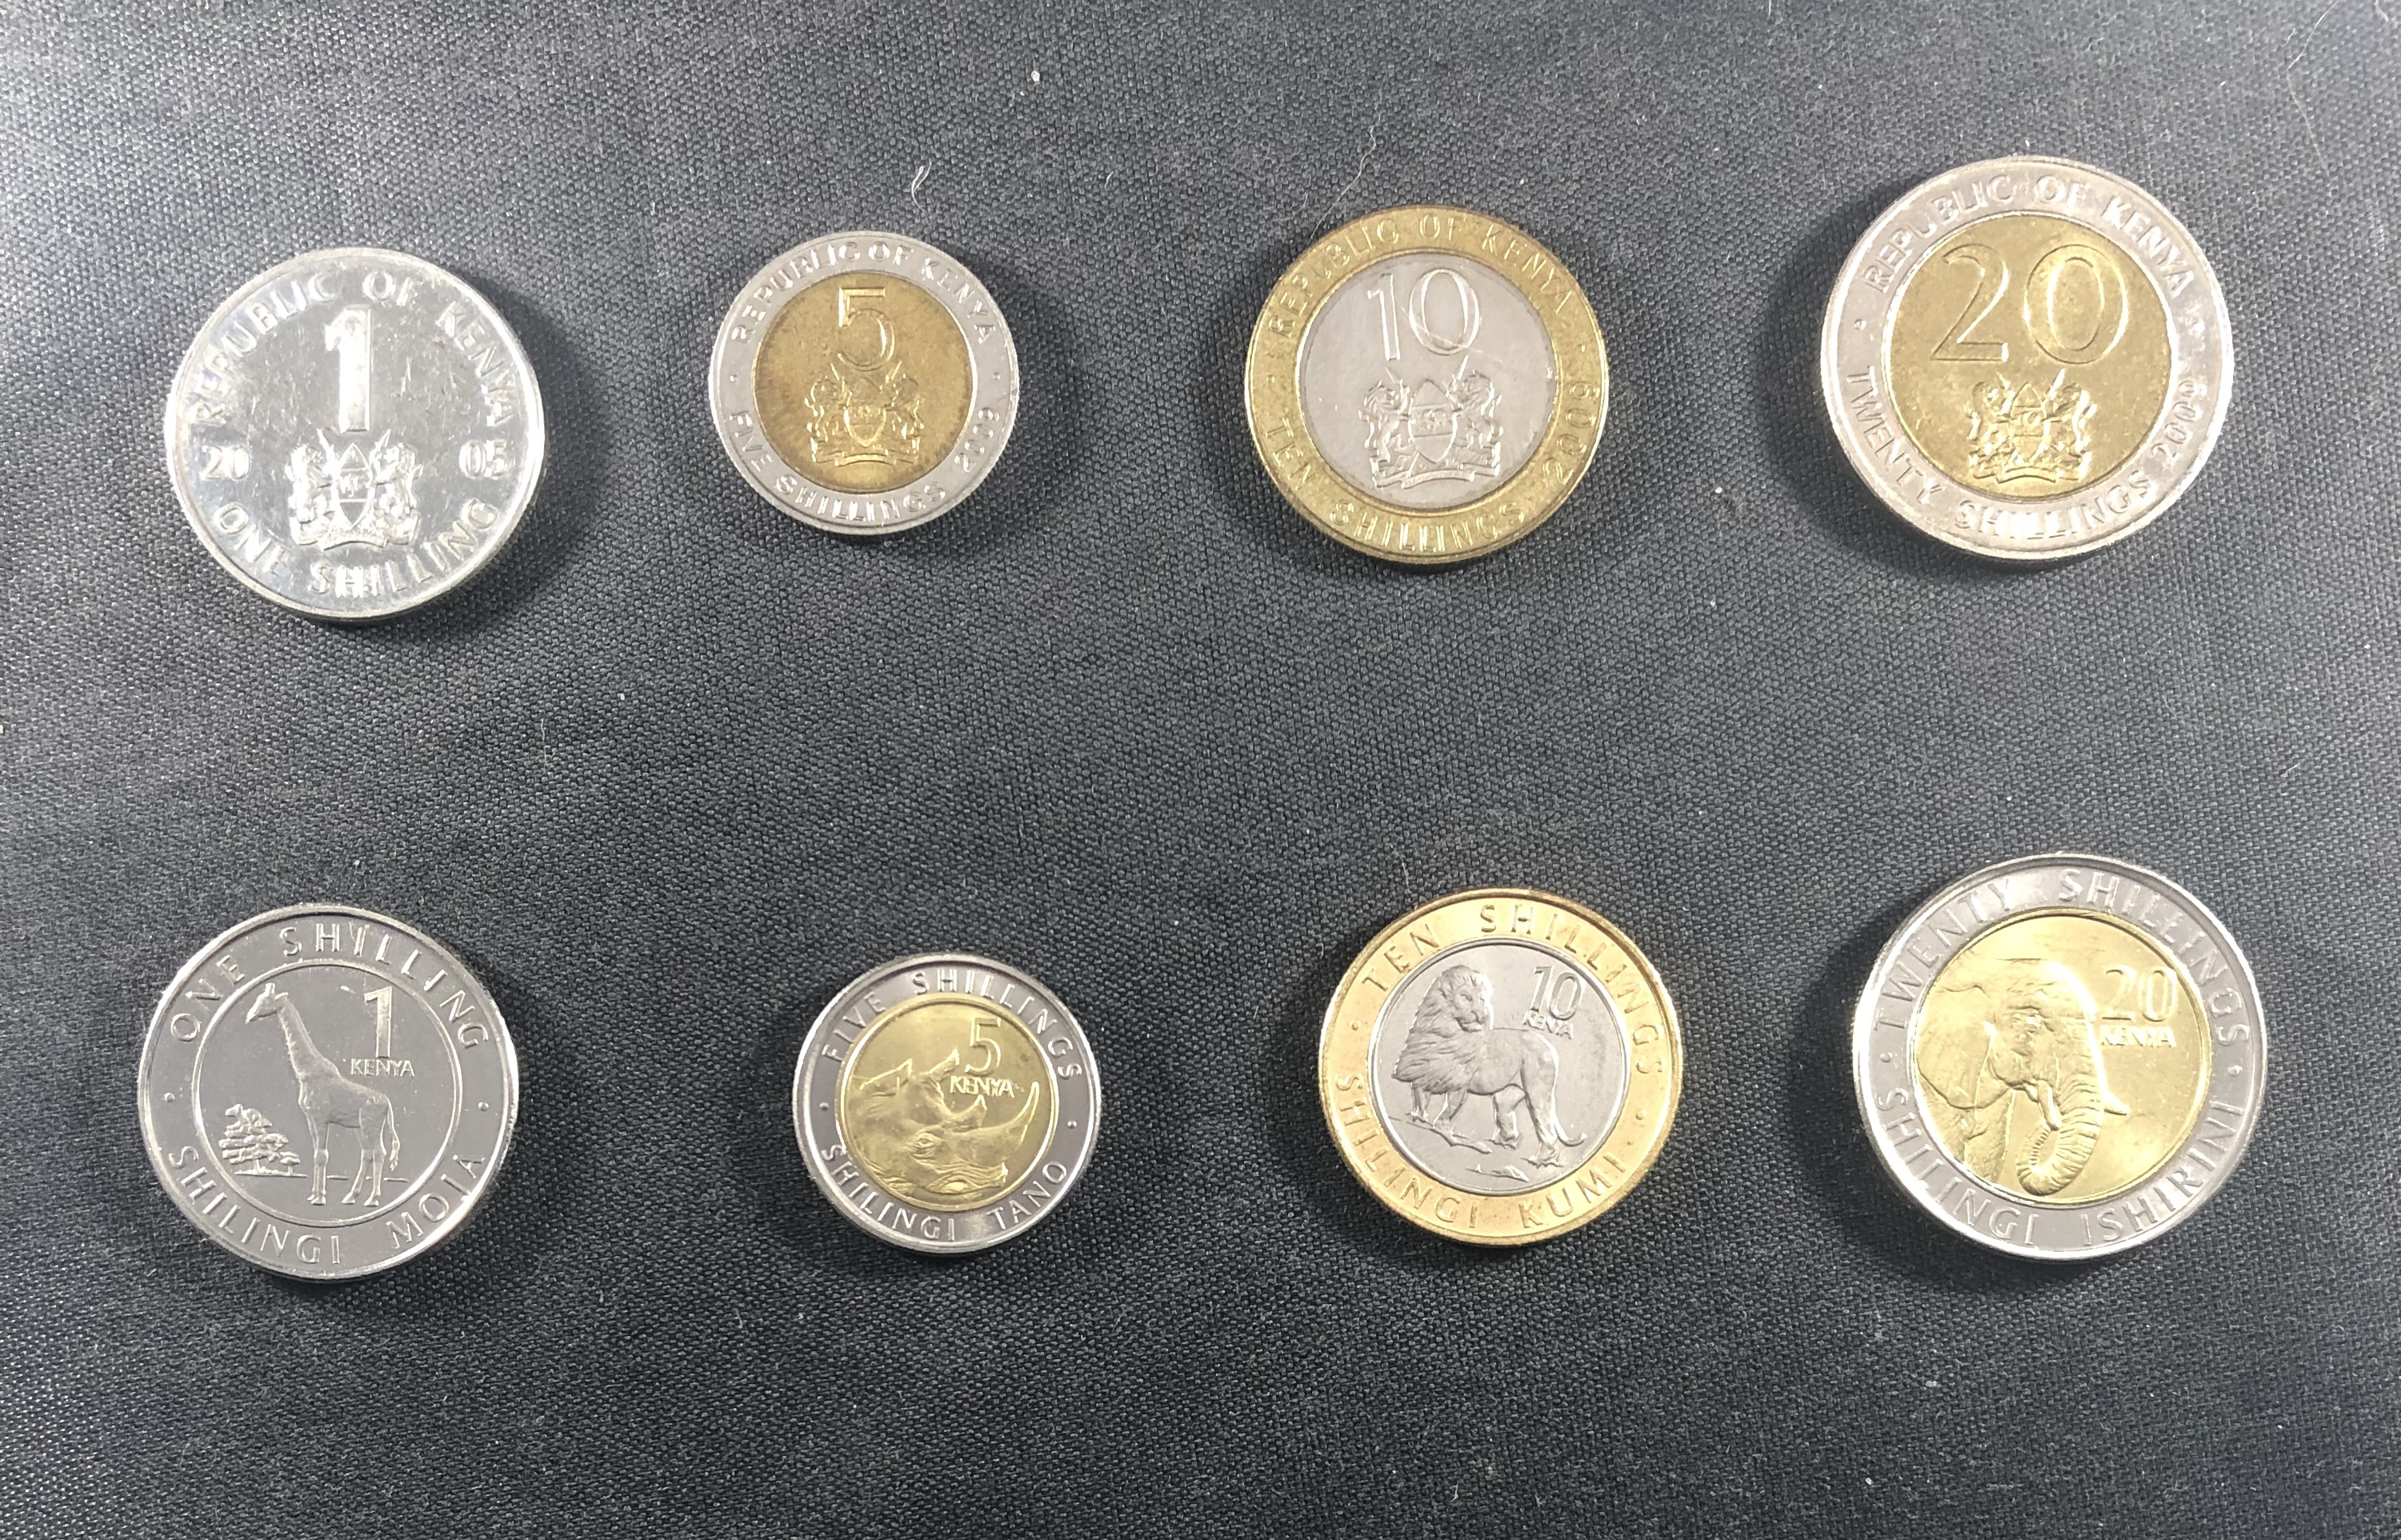 Kenya makes coins accessible for the visually impaired